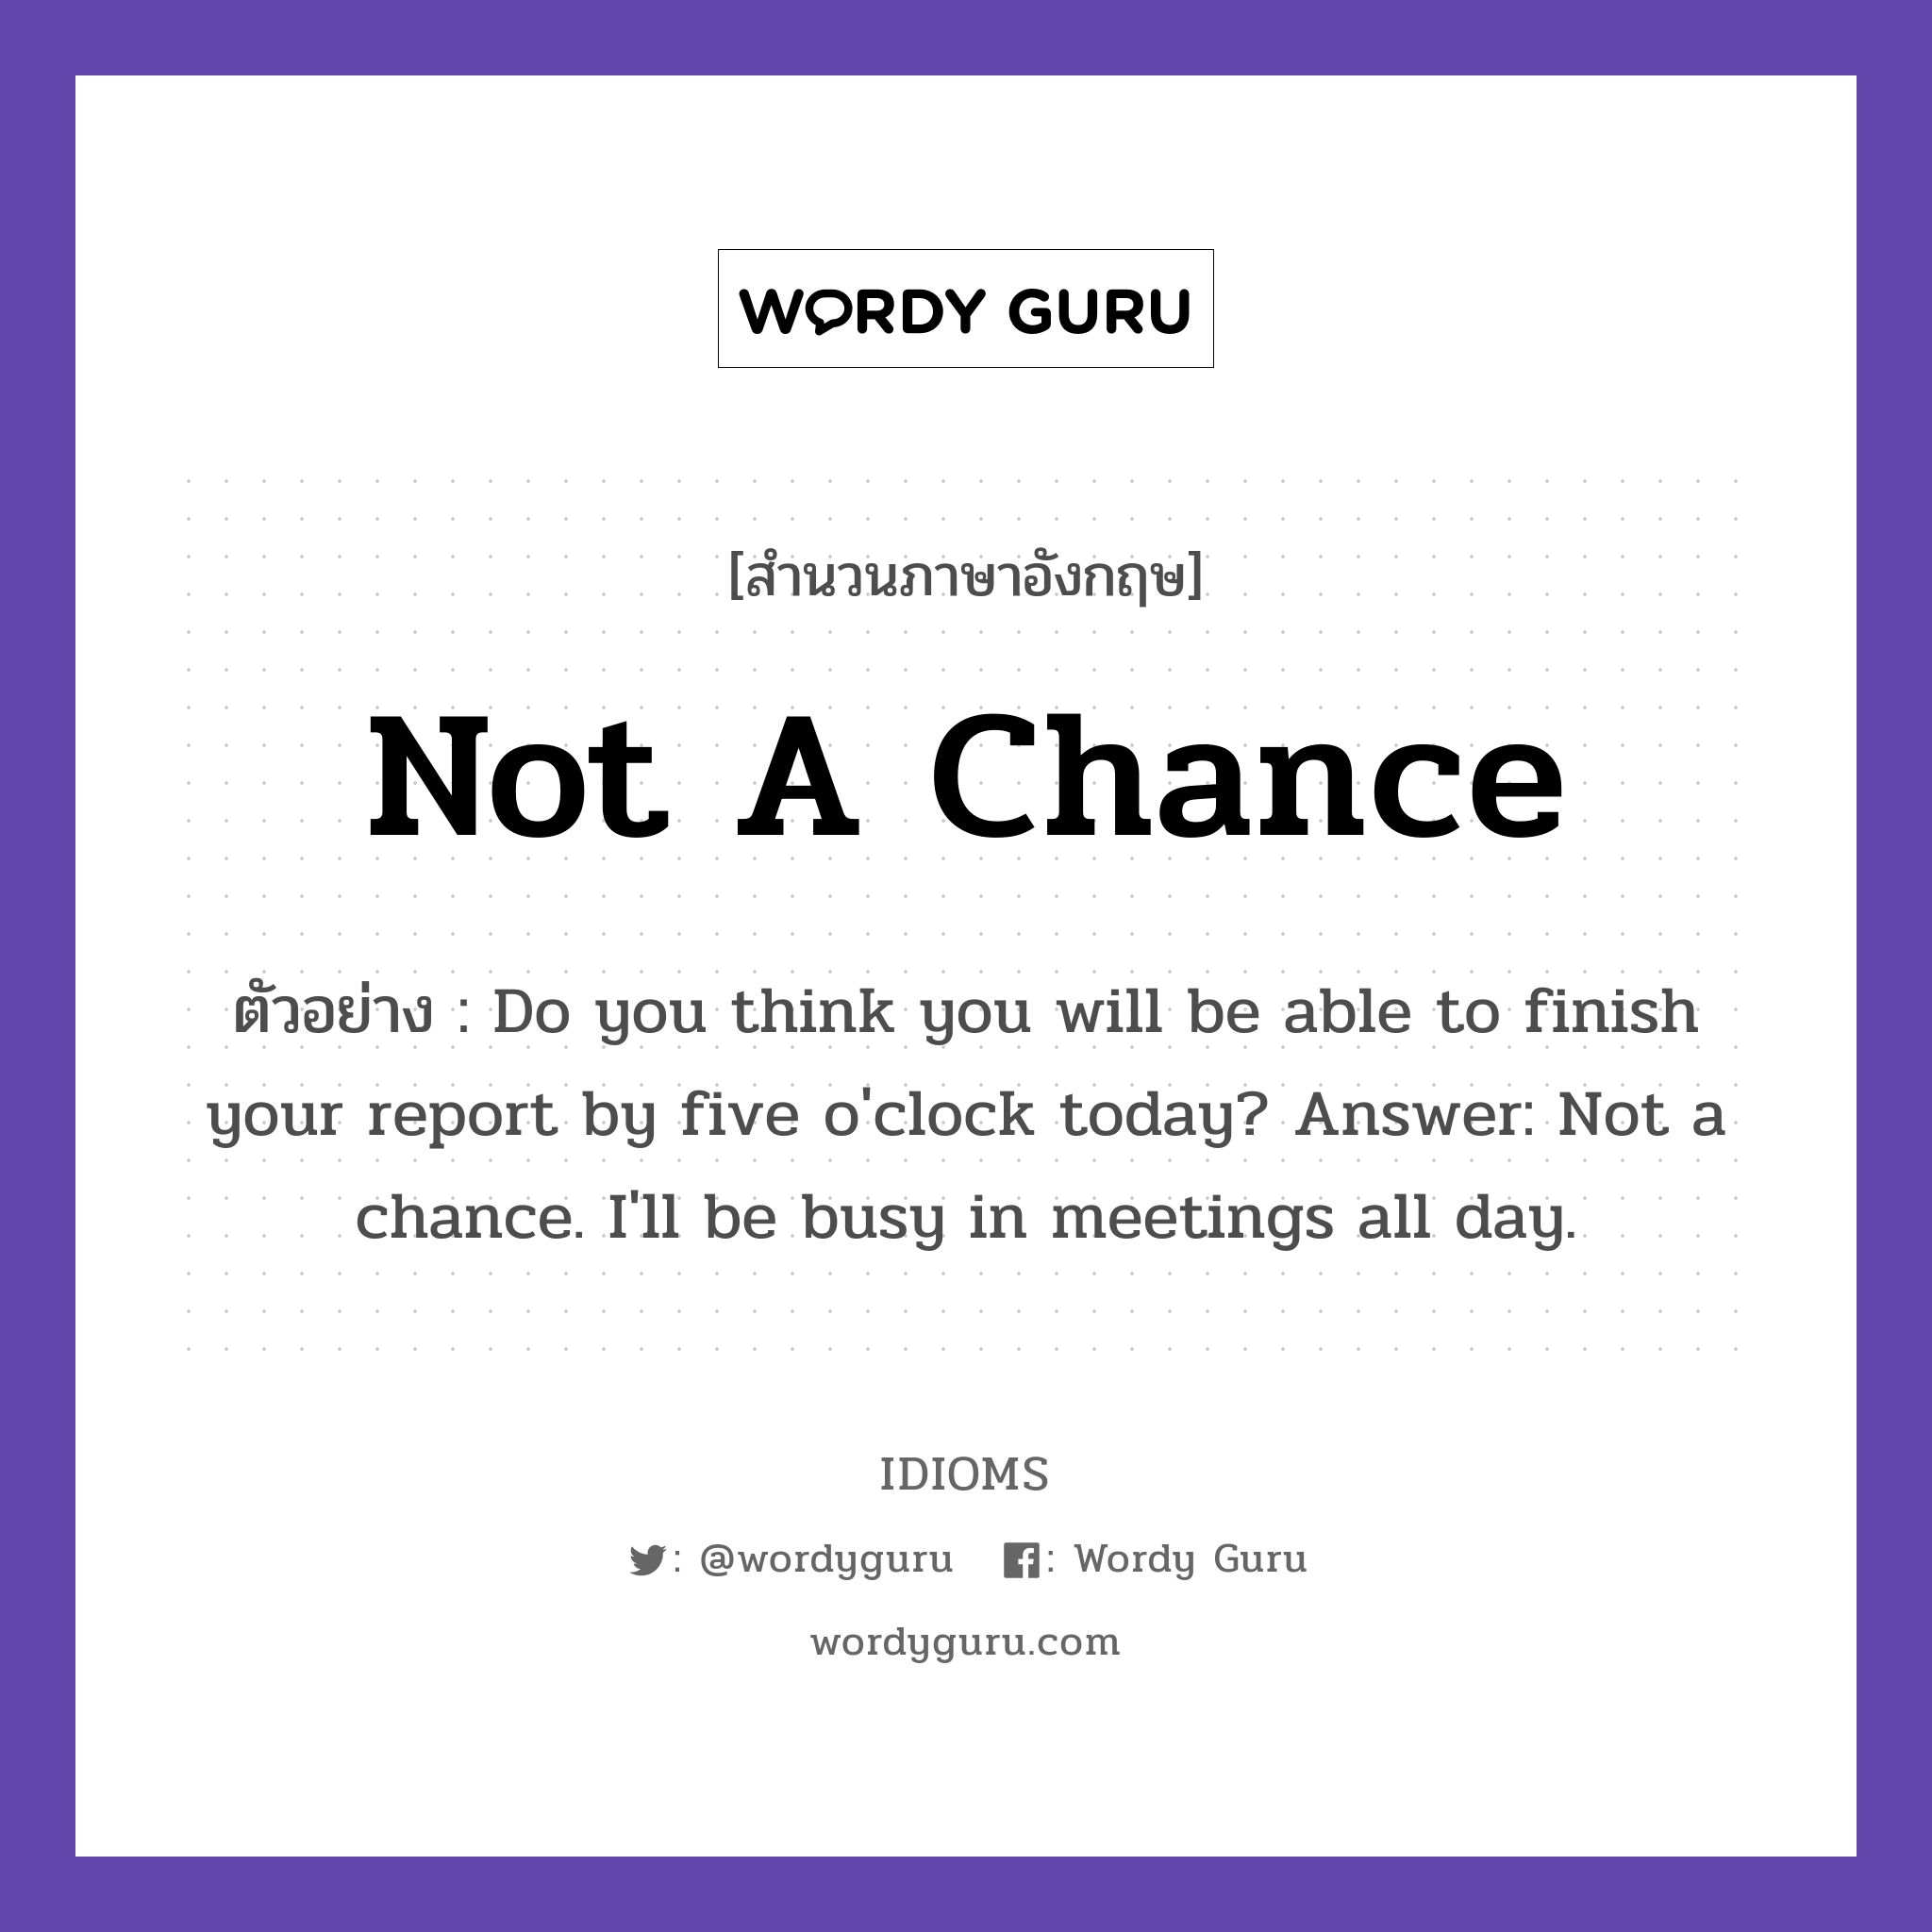 Not A Chance แปลว่า?, สำนวนภาษาอังกฤษ Not A Chance ตัวอย่าง Do you think you will be able to finish your report by five o'clock today? Answer: Not a chance. I'll be busy in meetings all day.